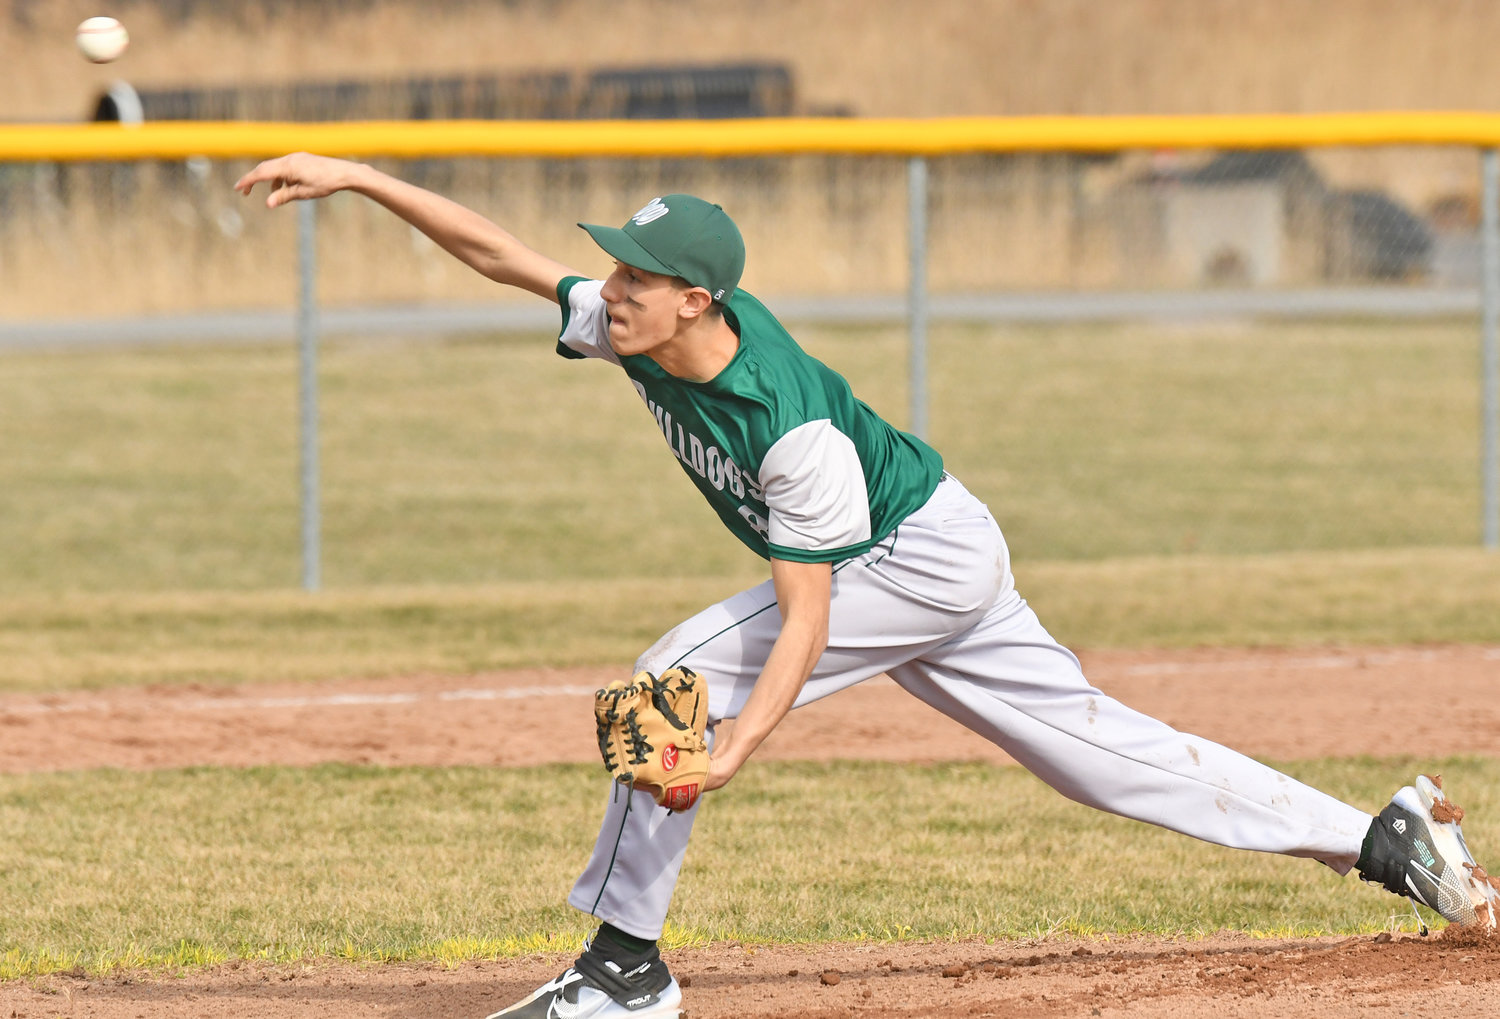 SIX STRONG INNINGS — Westmoreland starting pitcher Hunter Kierpiec delivers against Oriskany Tuesday. He threw six scoreless innings to earn the win as the Bulldogs won 11-2.